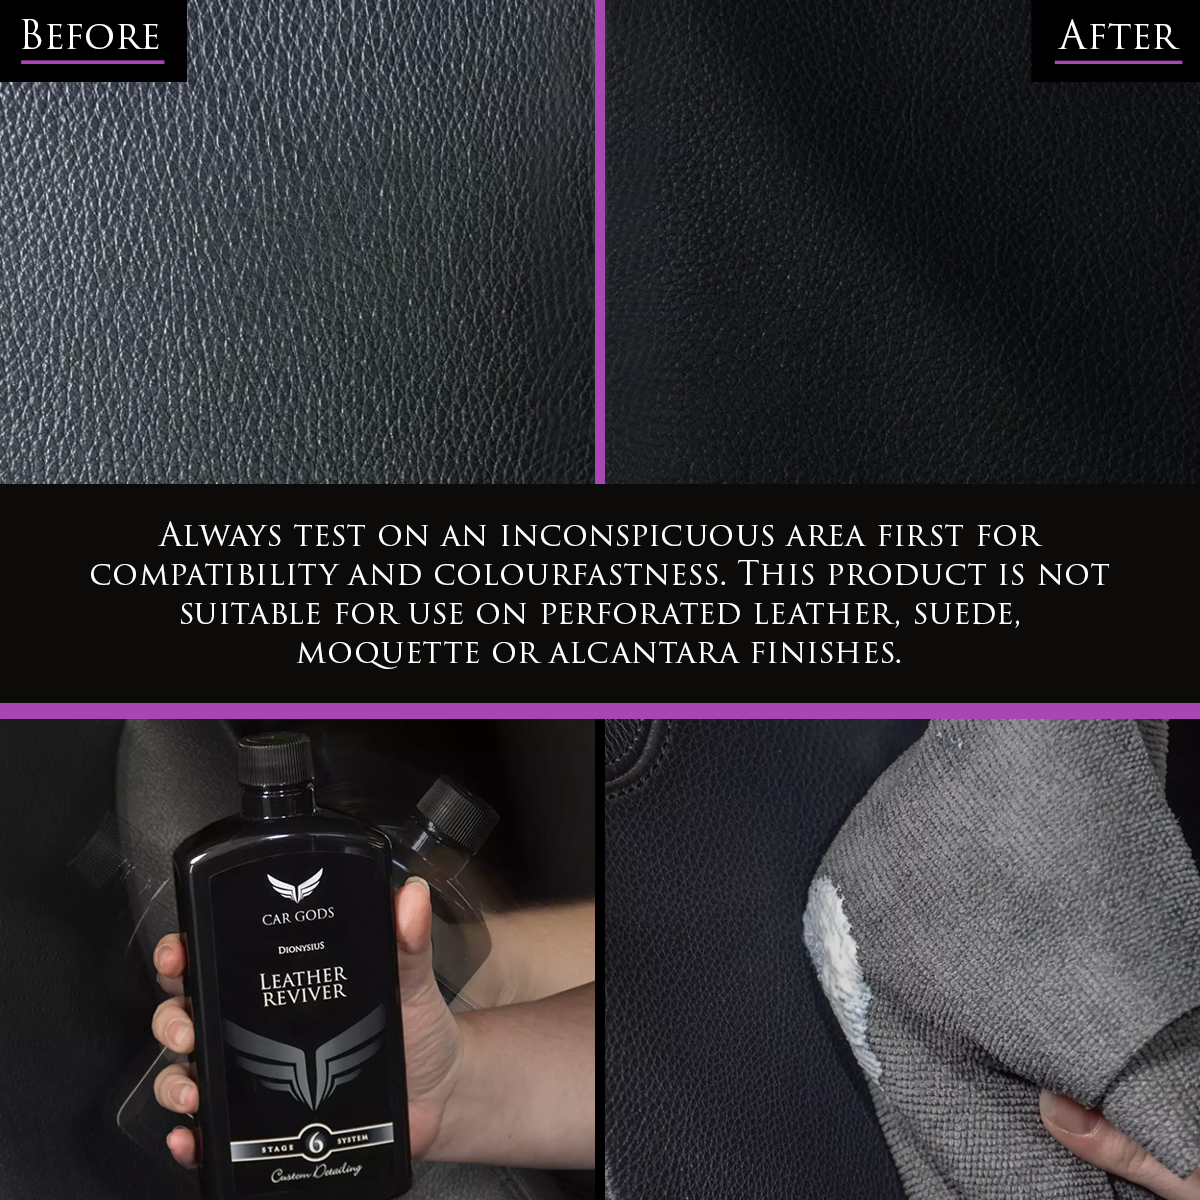 Image shows Car Gods Leather Reviver being applied to leather car upholstery using a grey microfibre cloth. Text: Always test on an inconspicuous area first for compatibility and colourfastness. This product is not suitable for use on perforated leather, suede, moquette or alcantara finishes.